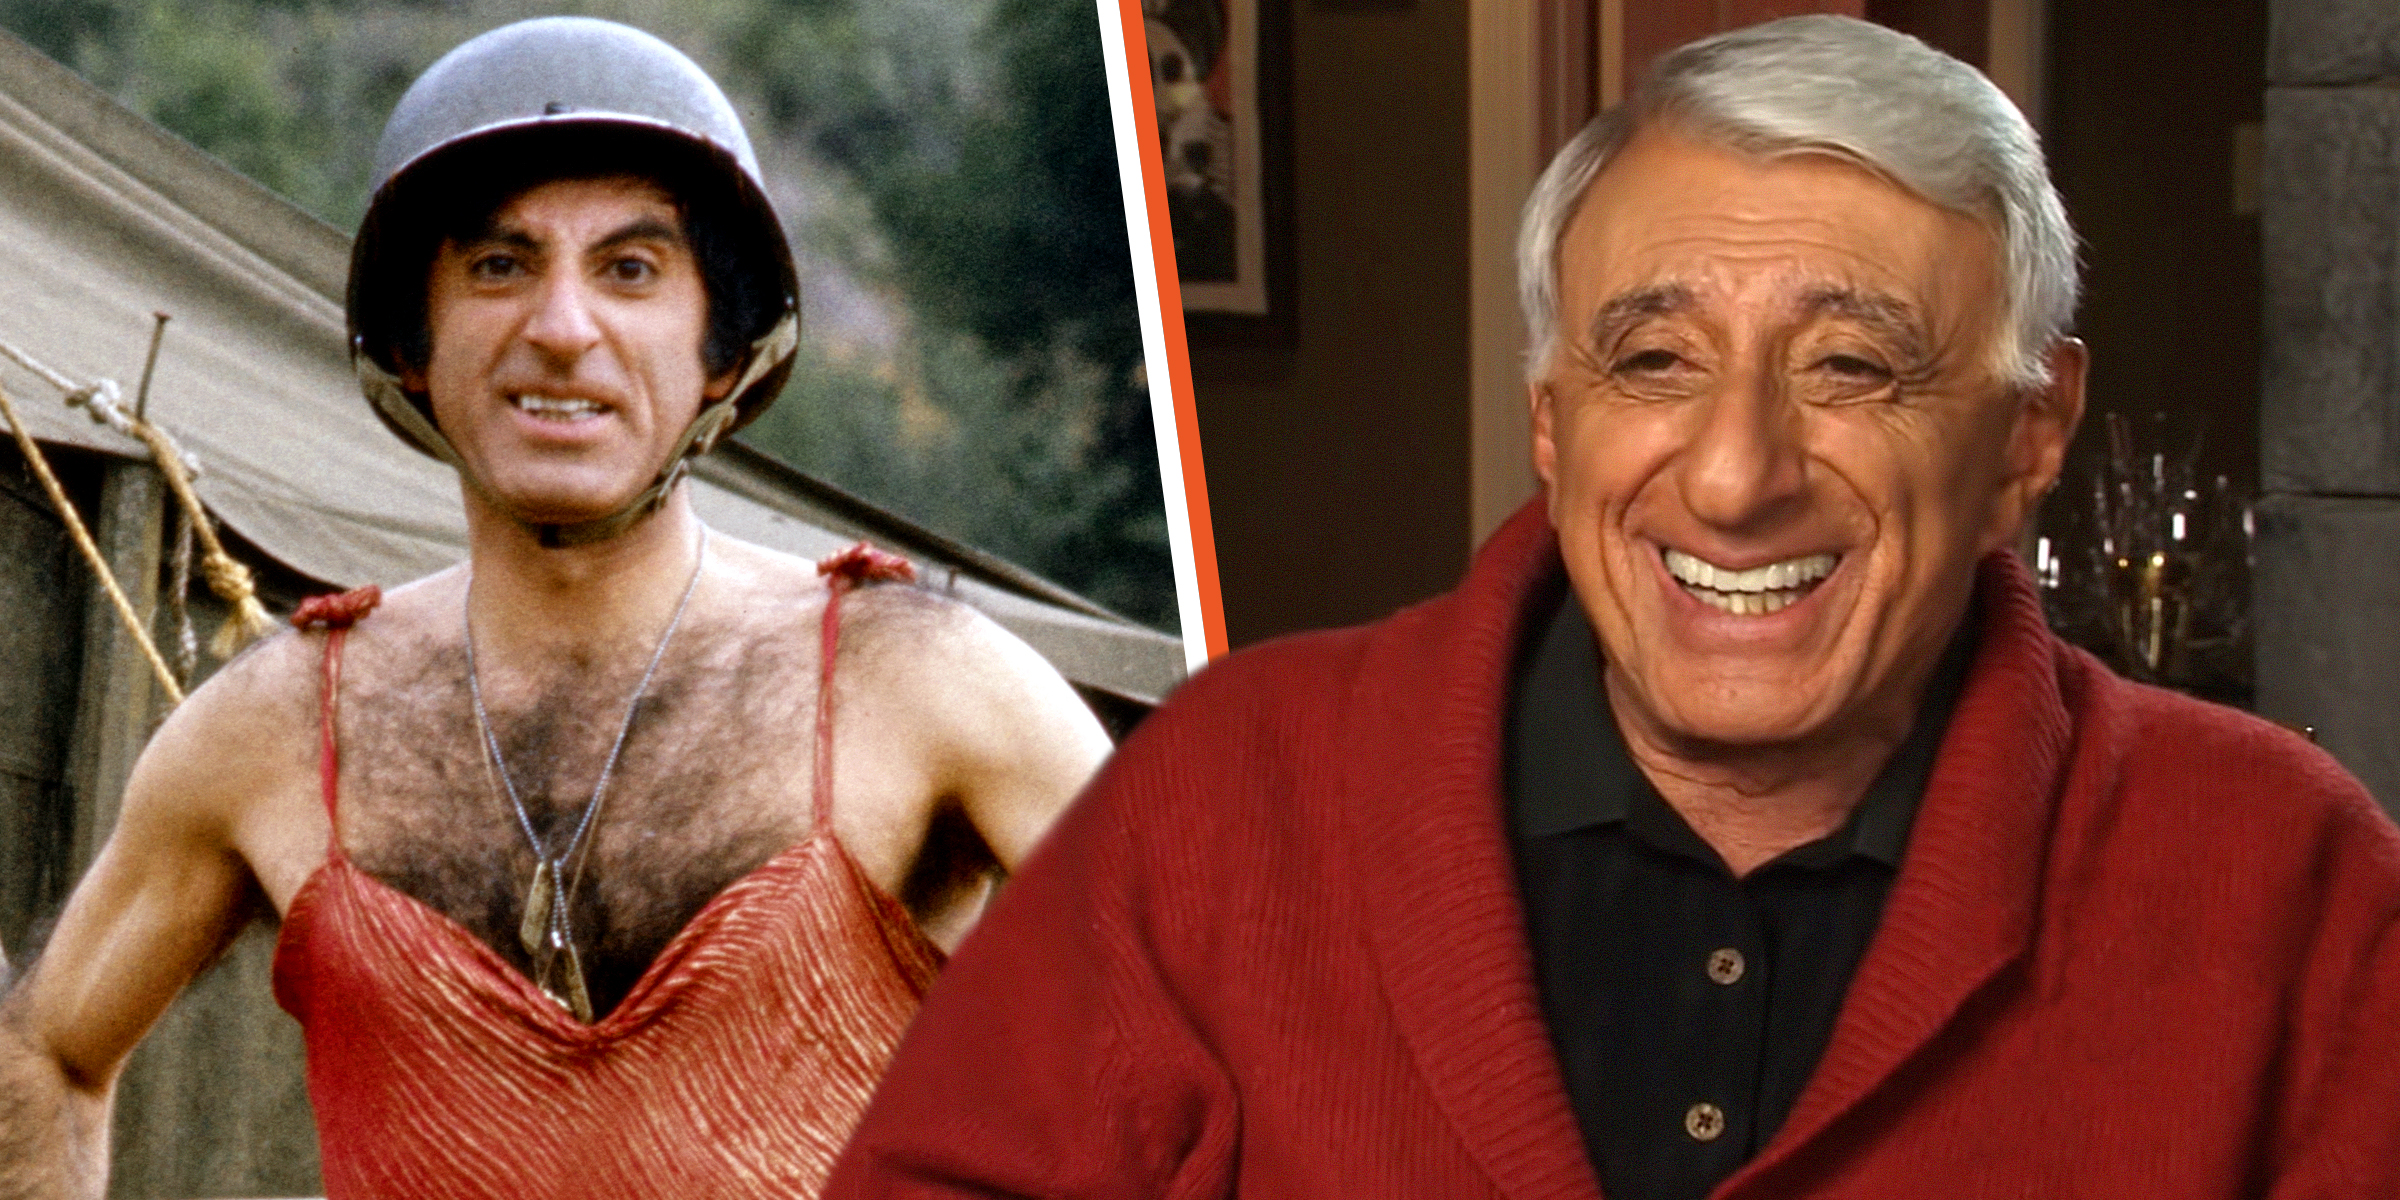 Jamie Farr | Source: Getty Images | Youtube/FoundationINTERVIEWS